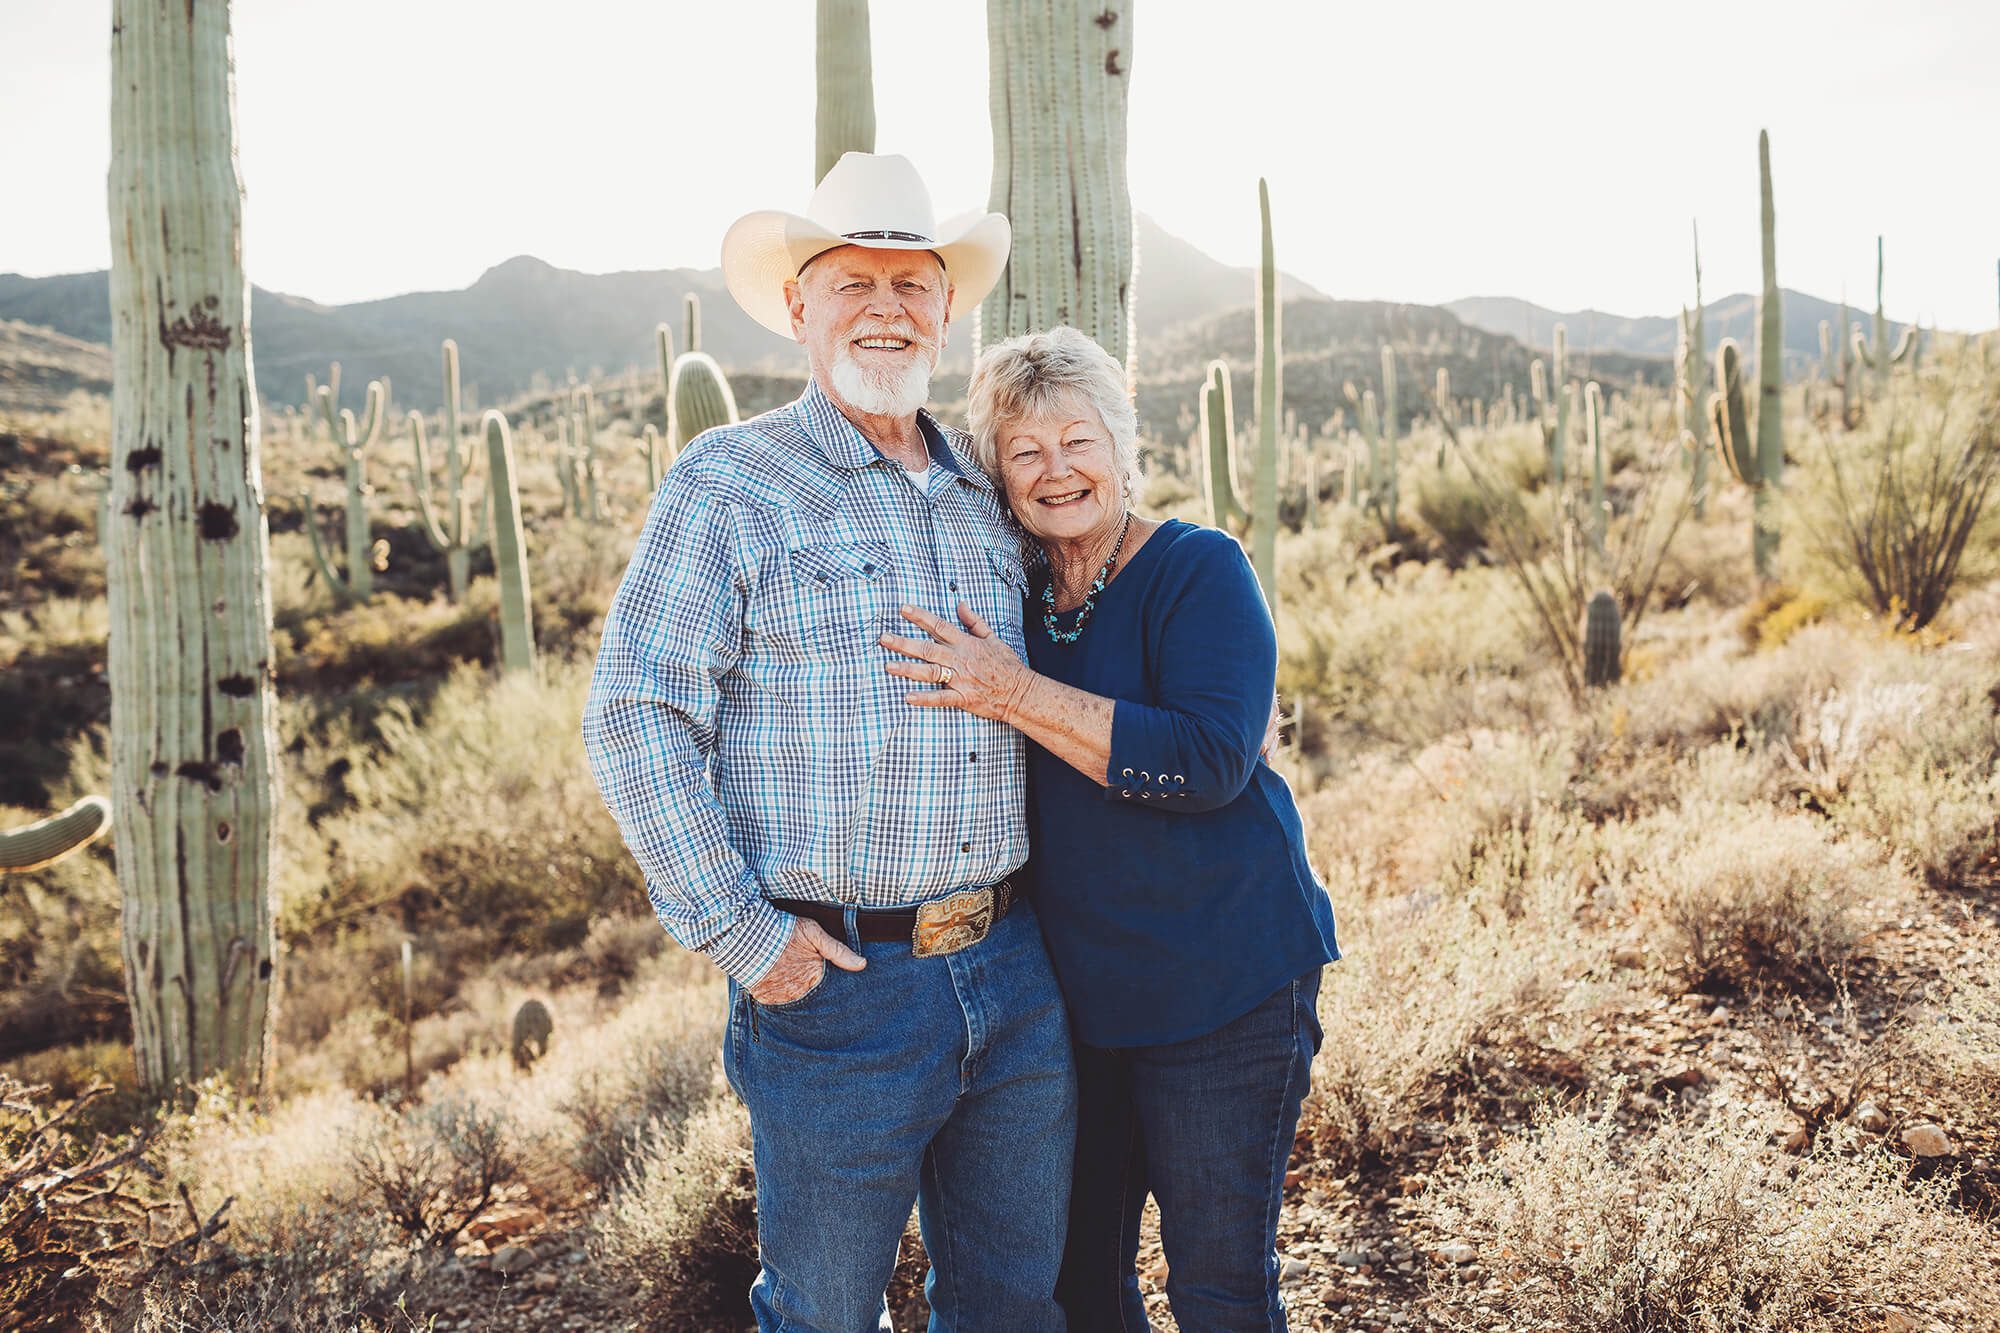 After decades of marriage this couple was still sweet and cuddly with one another